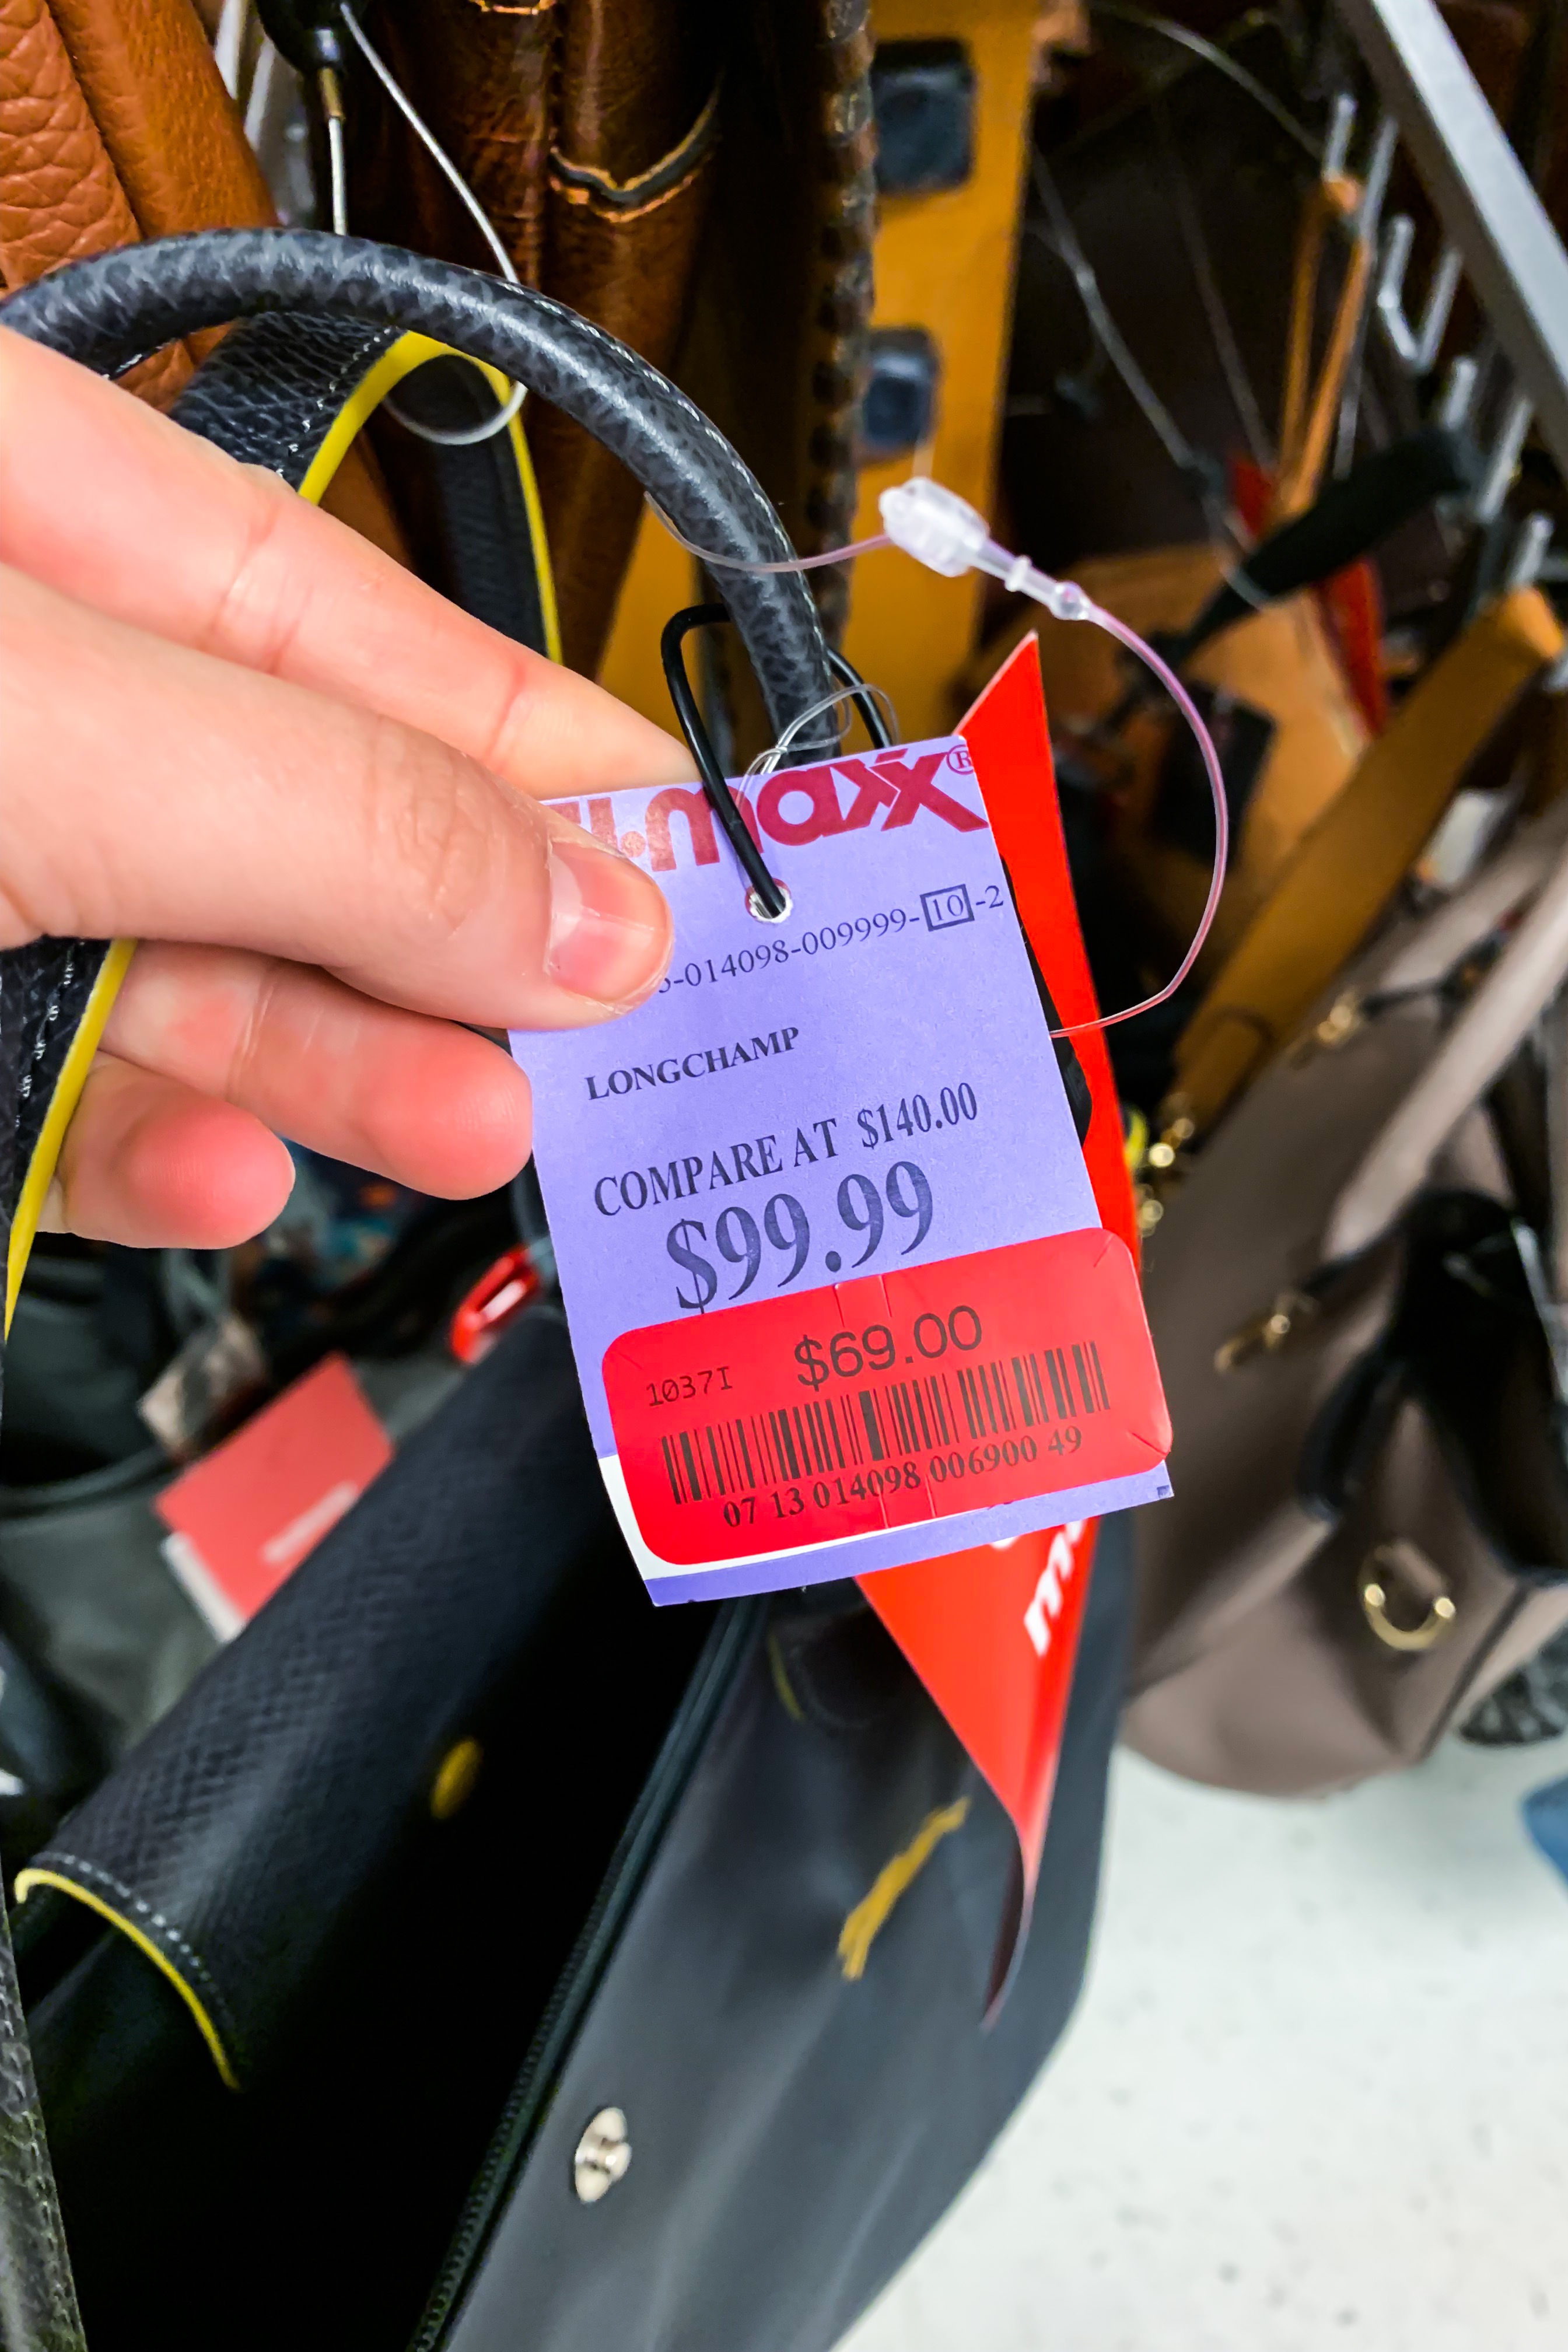 How to Find Successful Resale Brands from TJ Maxx